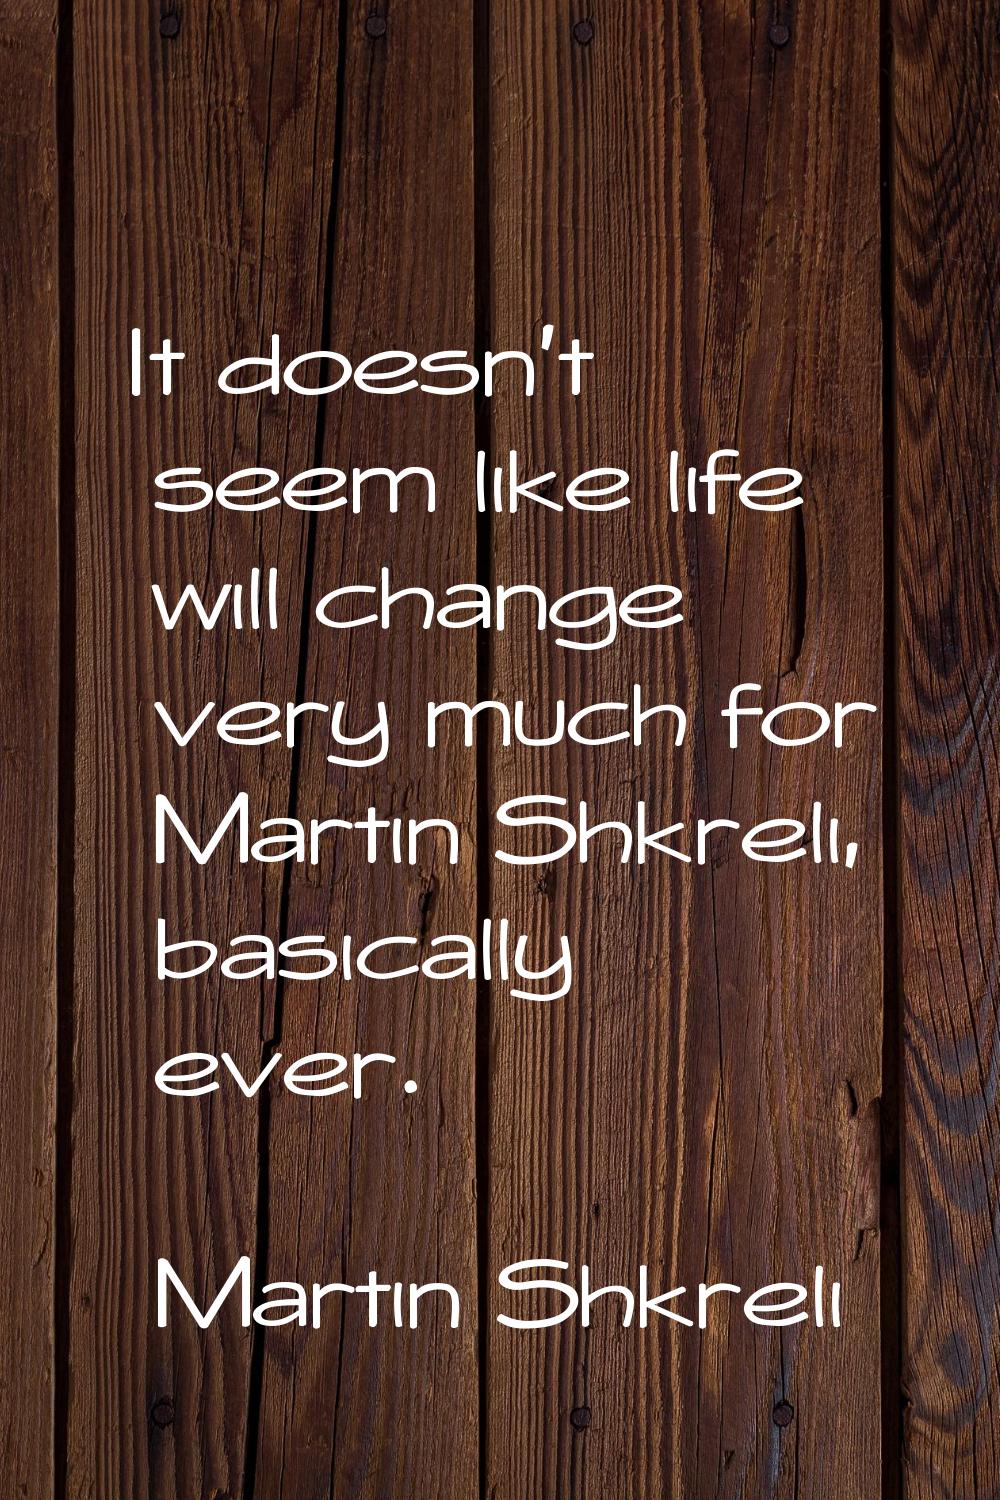 It doesn't seem like life will change very much for Martin Shkreli, basically ever.